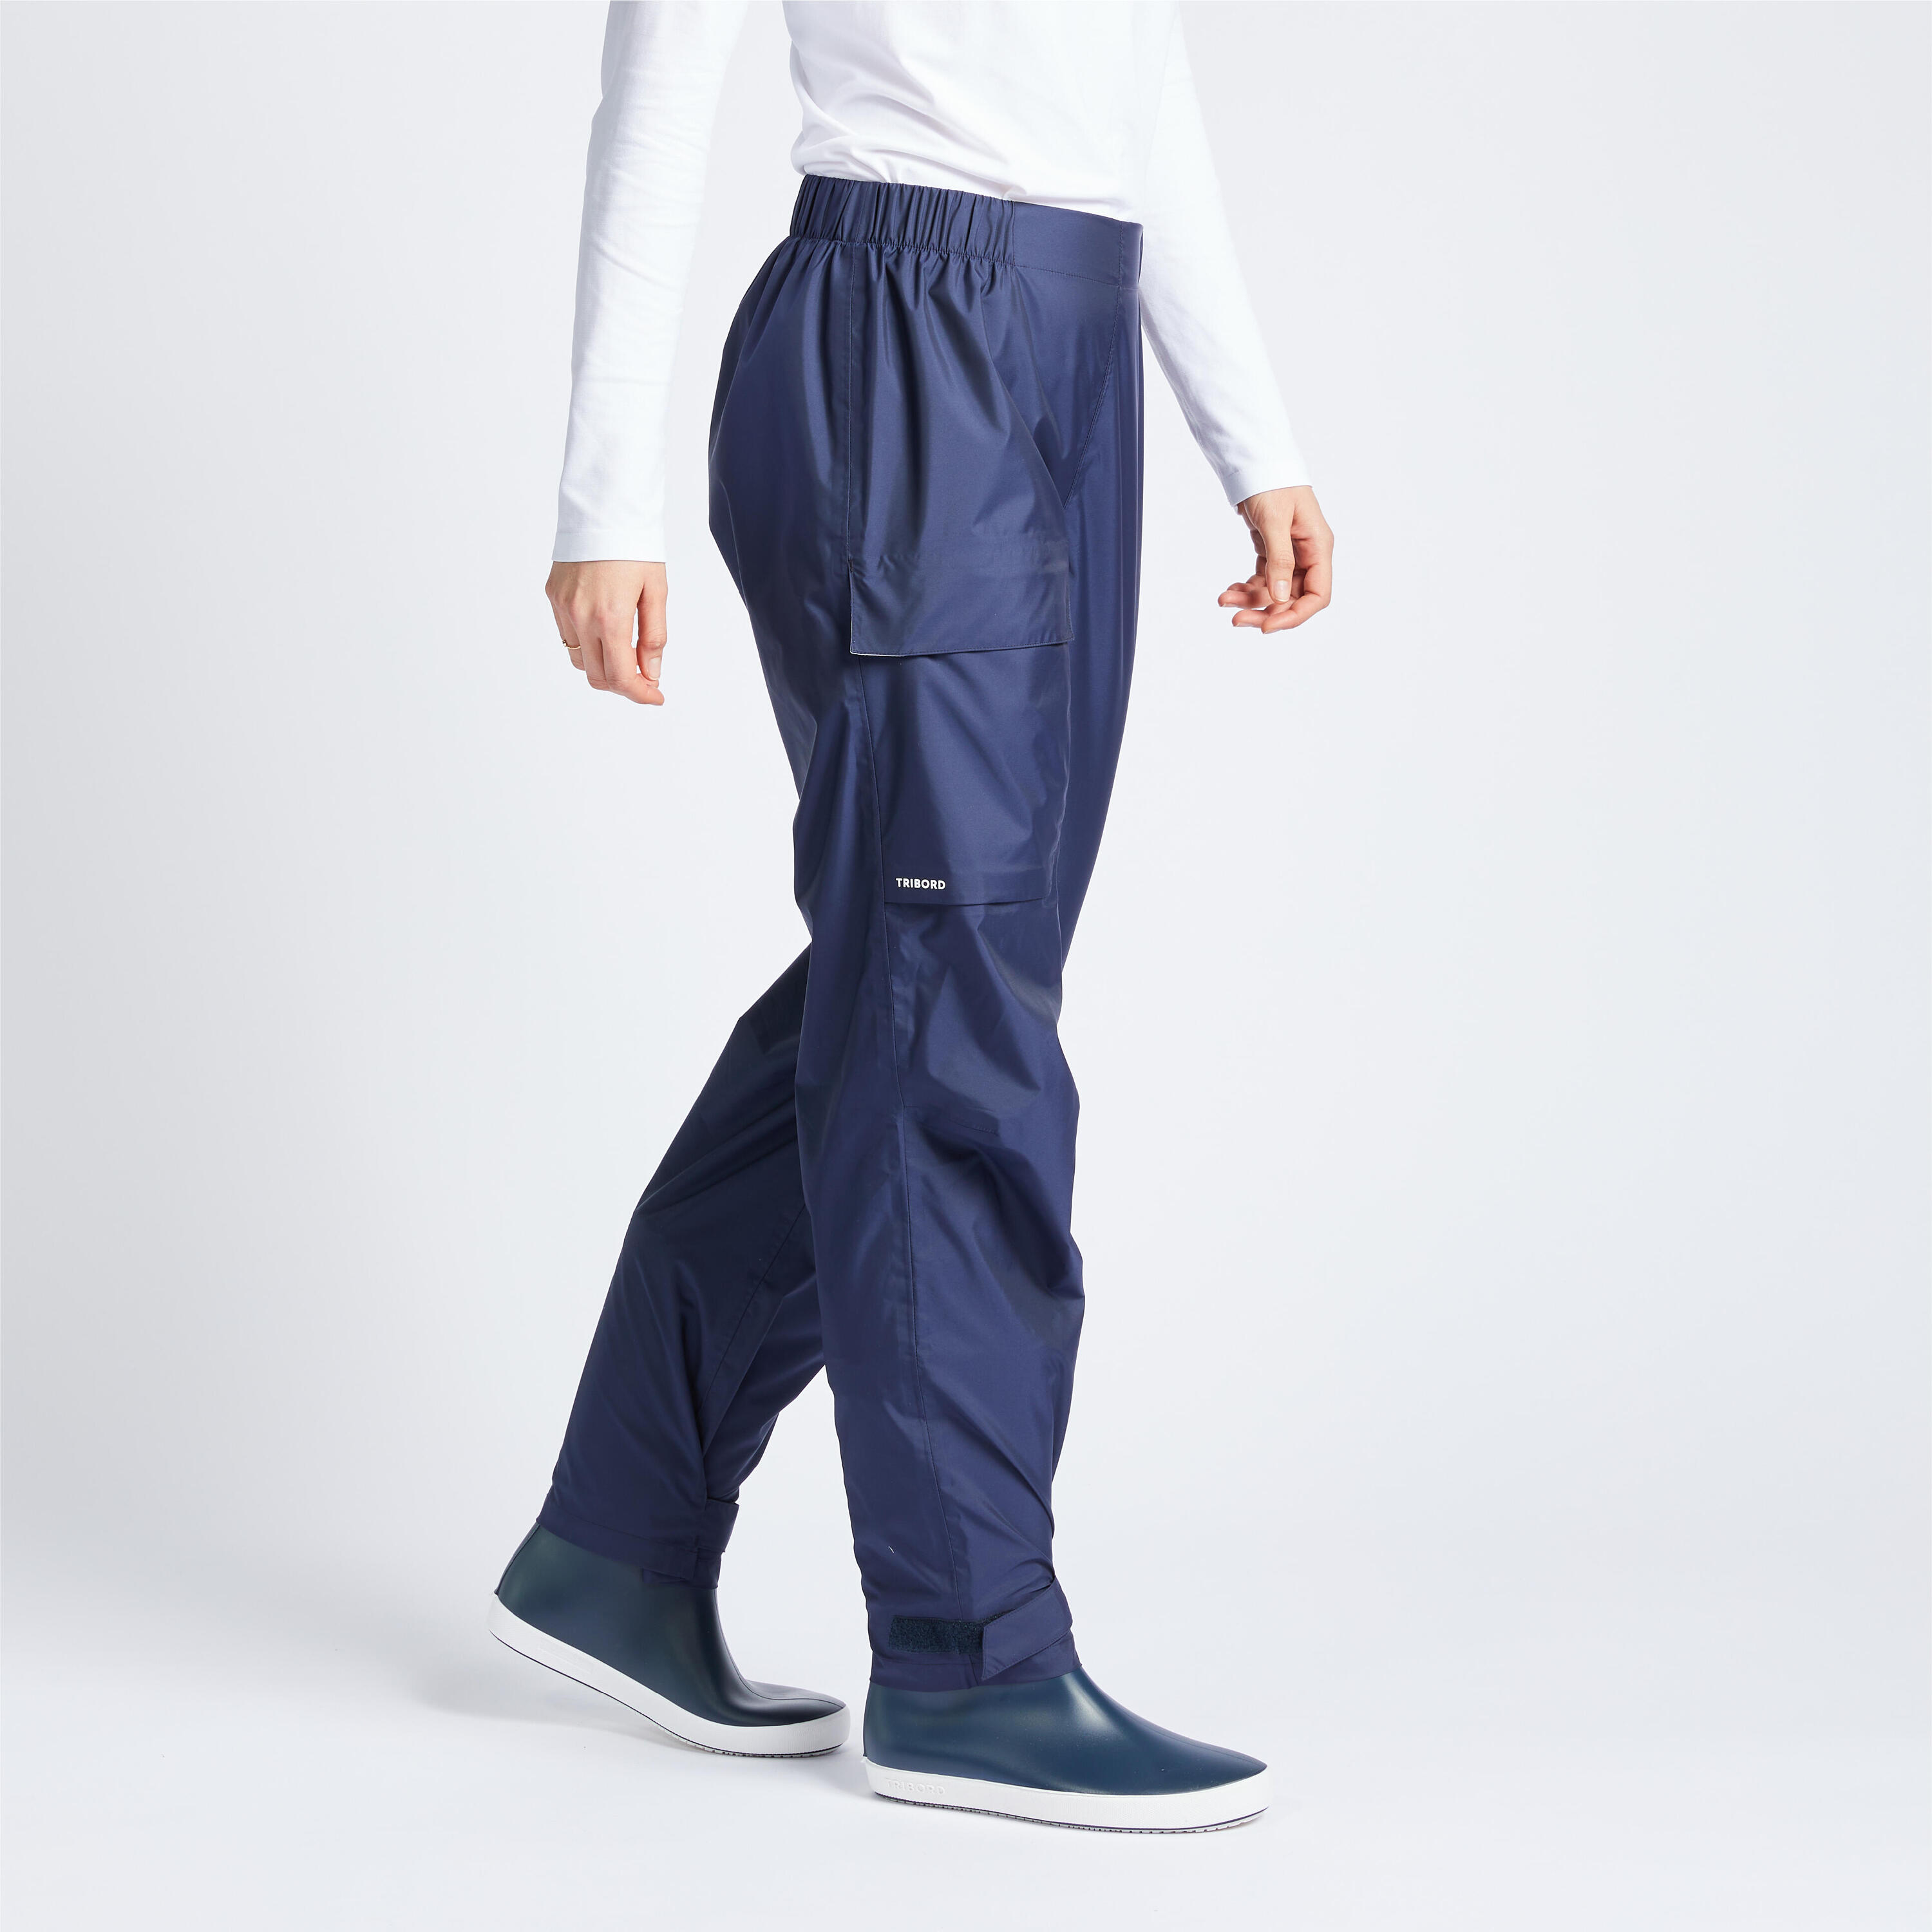 Women's waterproof sailing overtrousers 100 - Navy 3/8